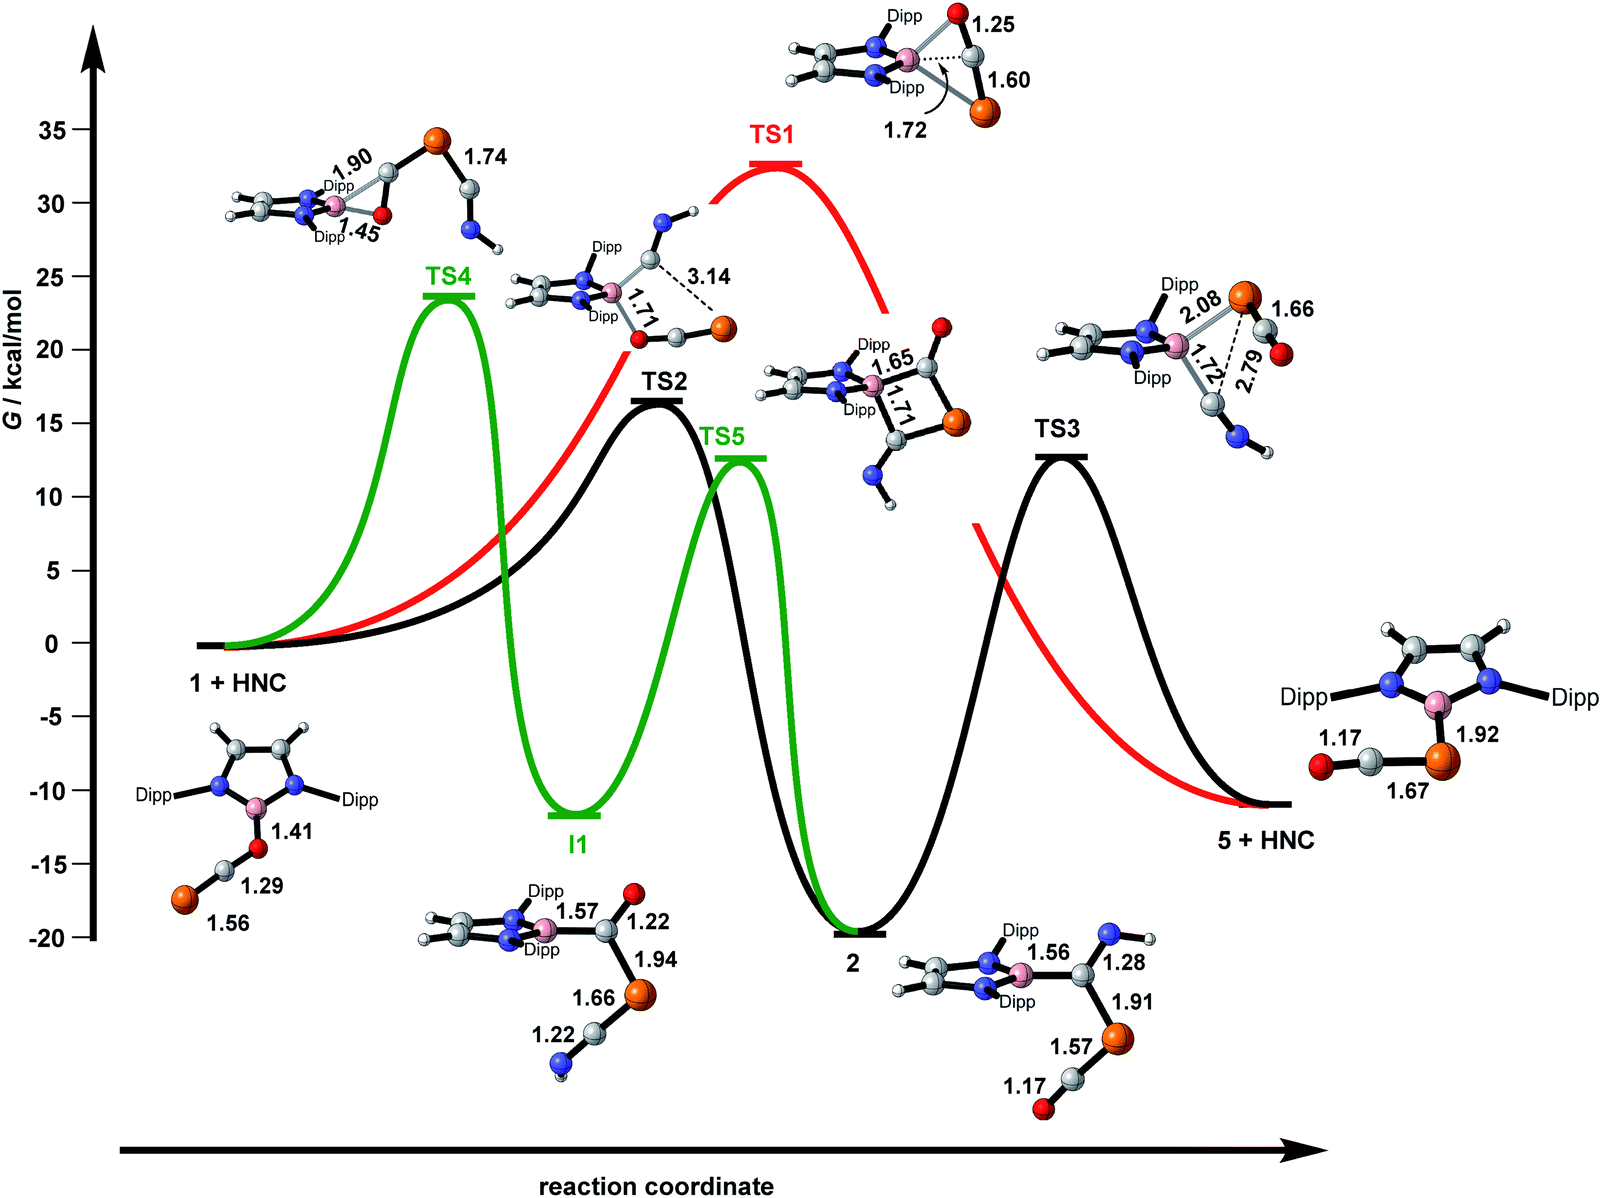 Base Induced Isomerisation Of A Phosphaethynolato Borane Mechanistic Insights Into Boryl Migration And Decarbonylation To Afford A Triplet Phosphinid Chemical Science Rsc Publishing Doi 10 1039 C9sce